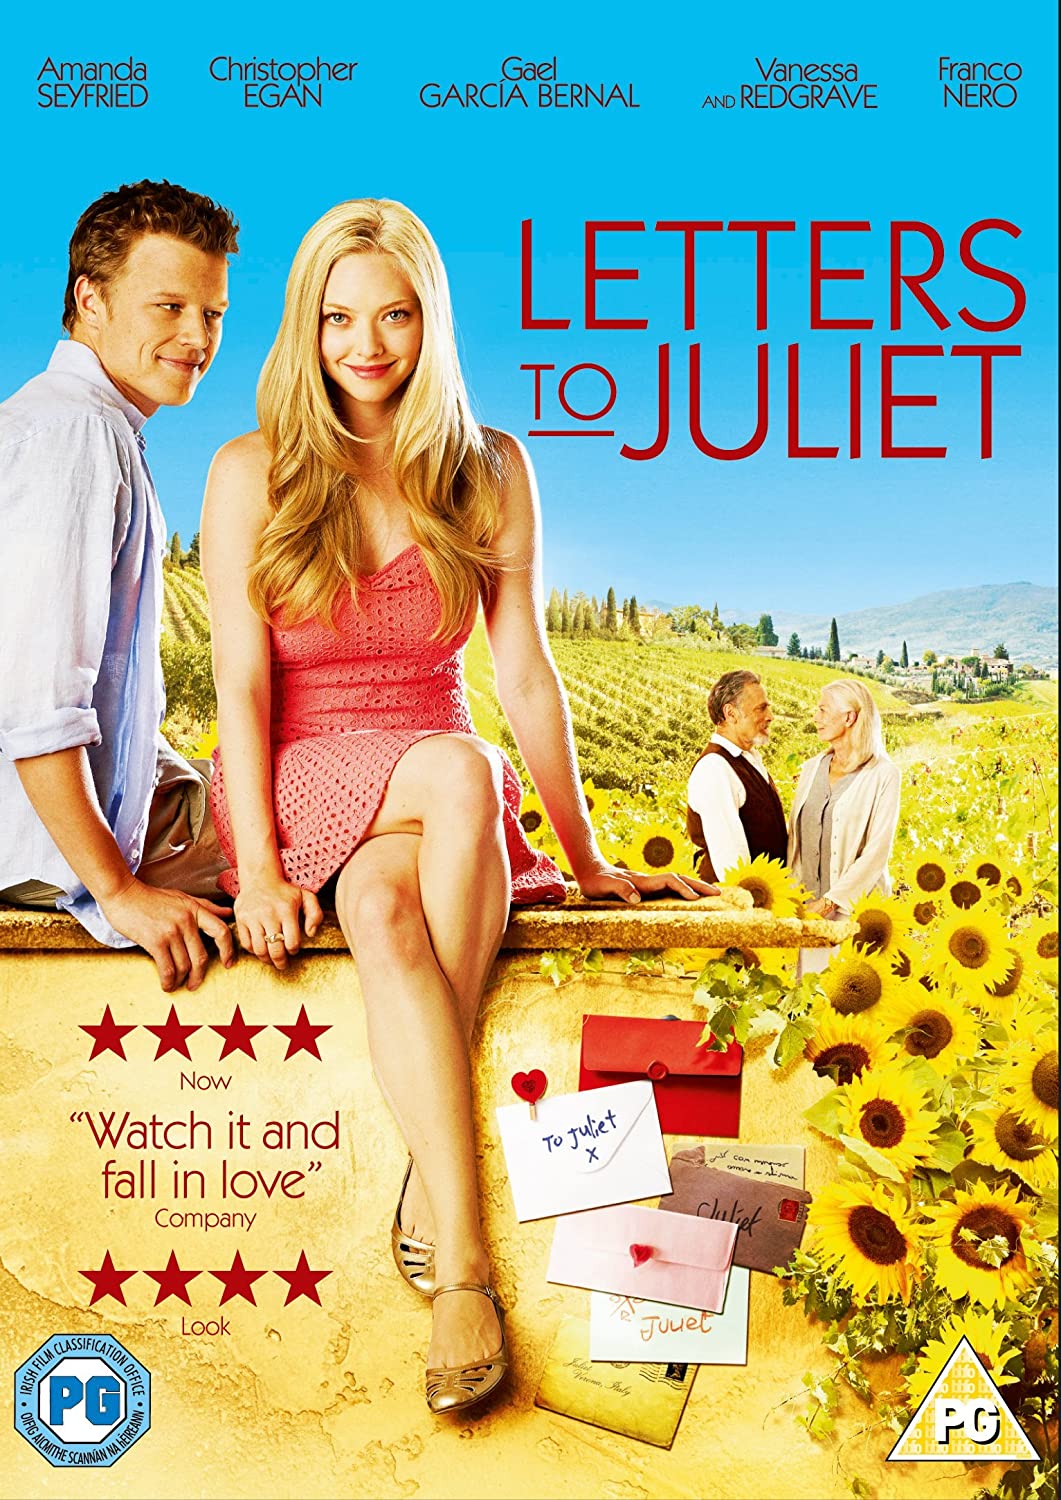 Letters to Juliet [2010] - Romance/Drama [DVD]